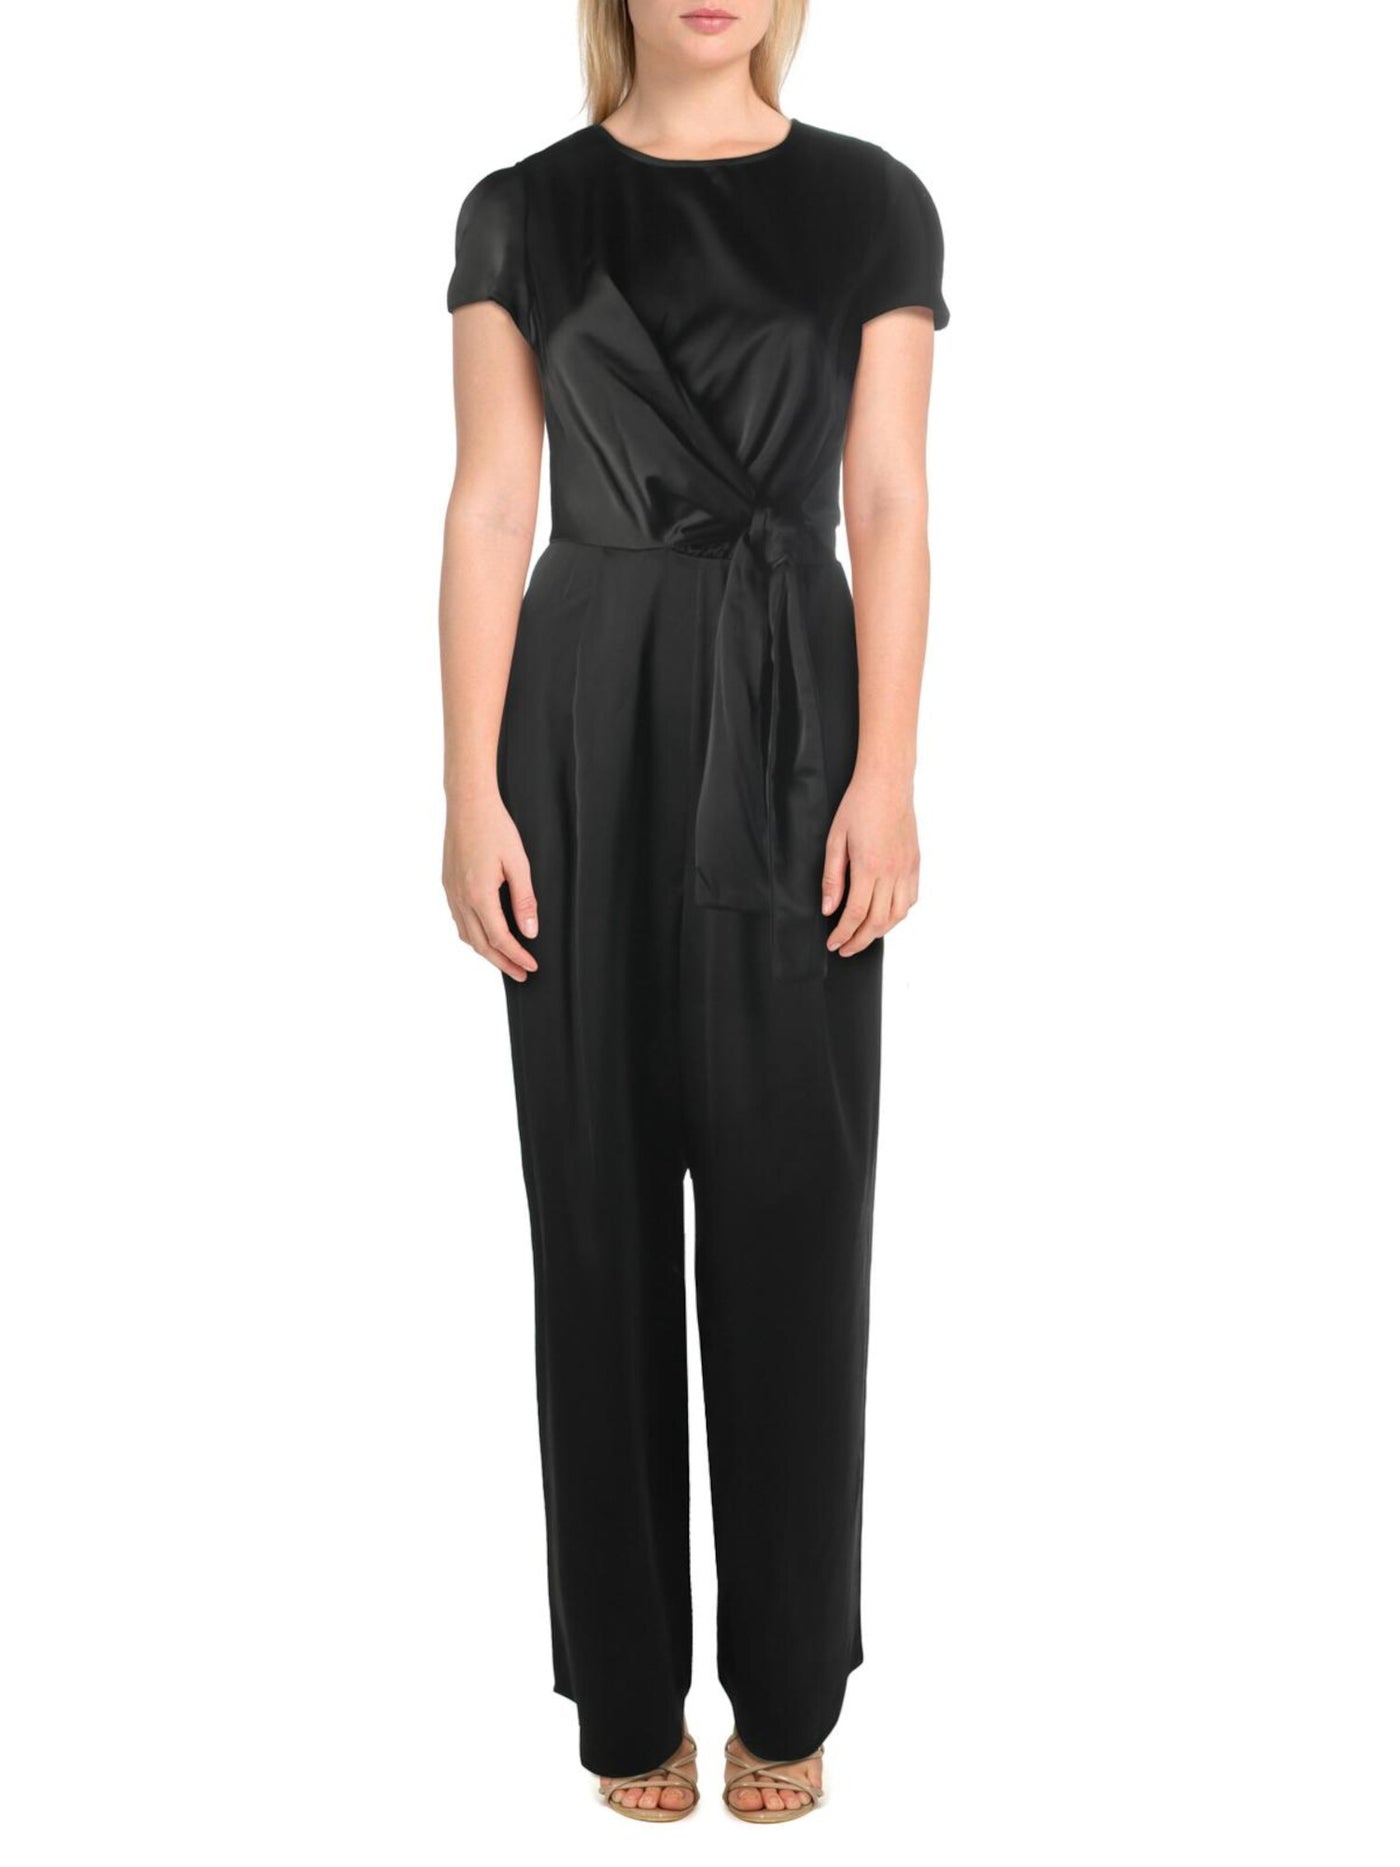 LISA  + LUCY Womens Ruched Tie Satin Short Sleeve Crew Neck Wear To Work Straight leg Jumpsuit